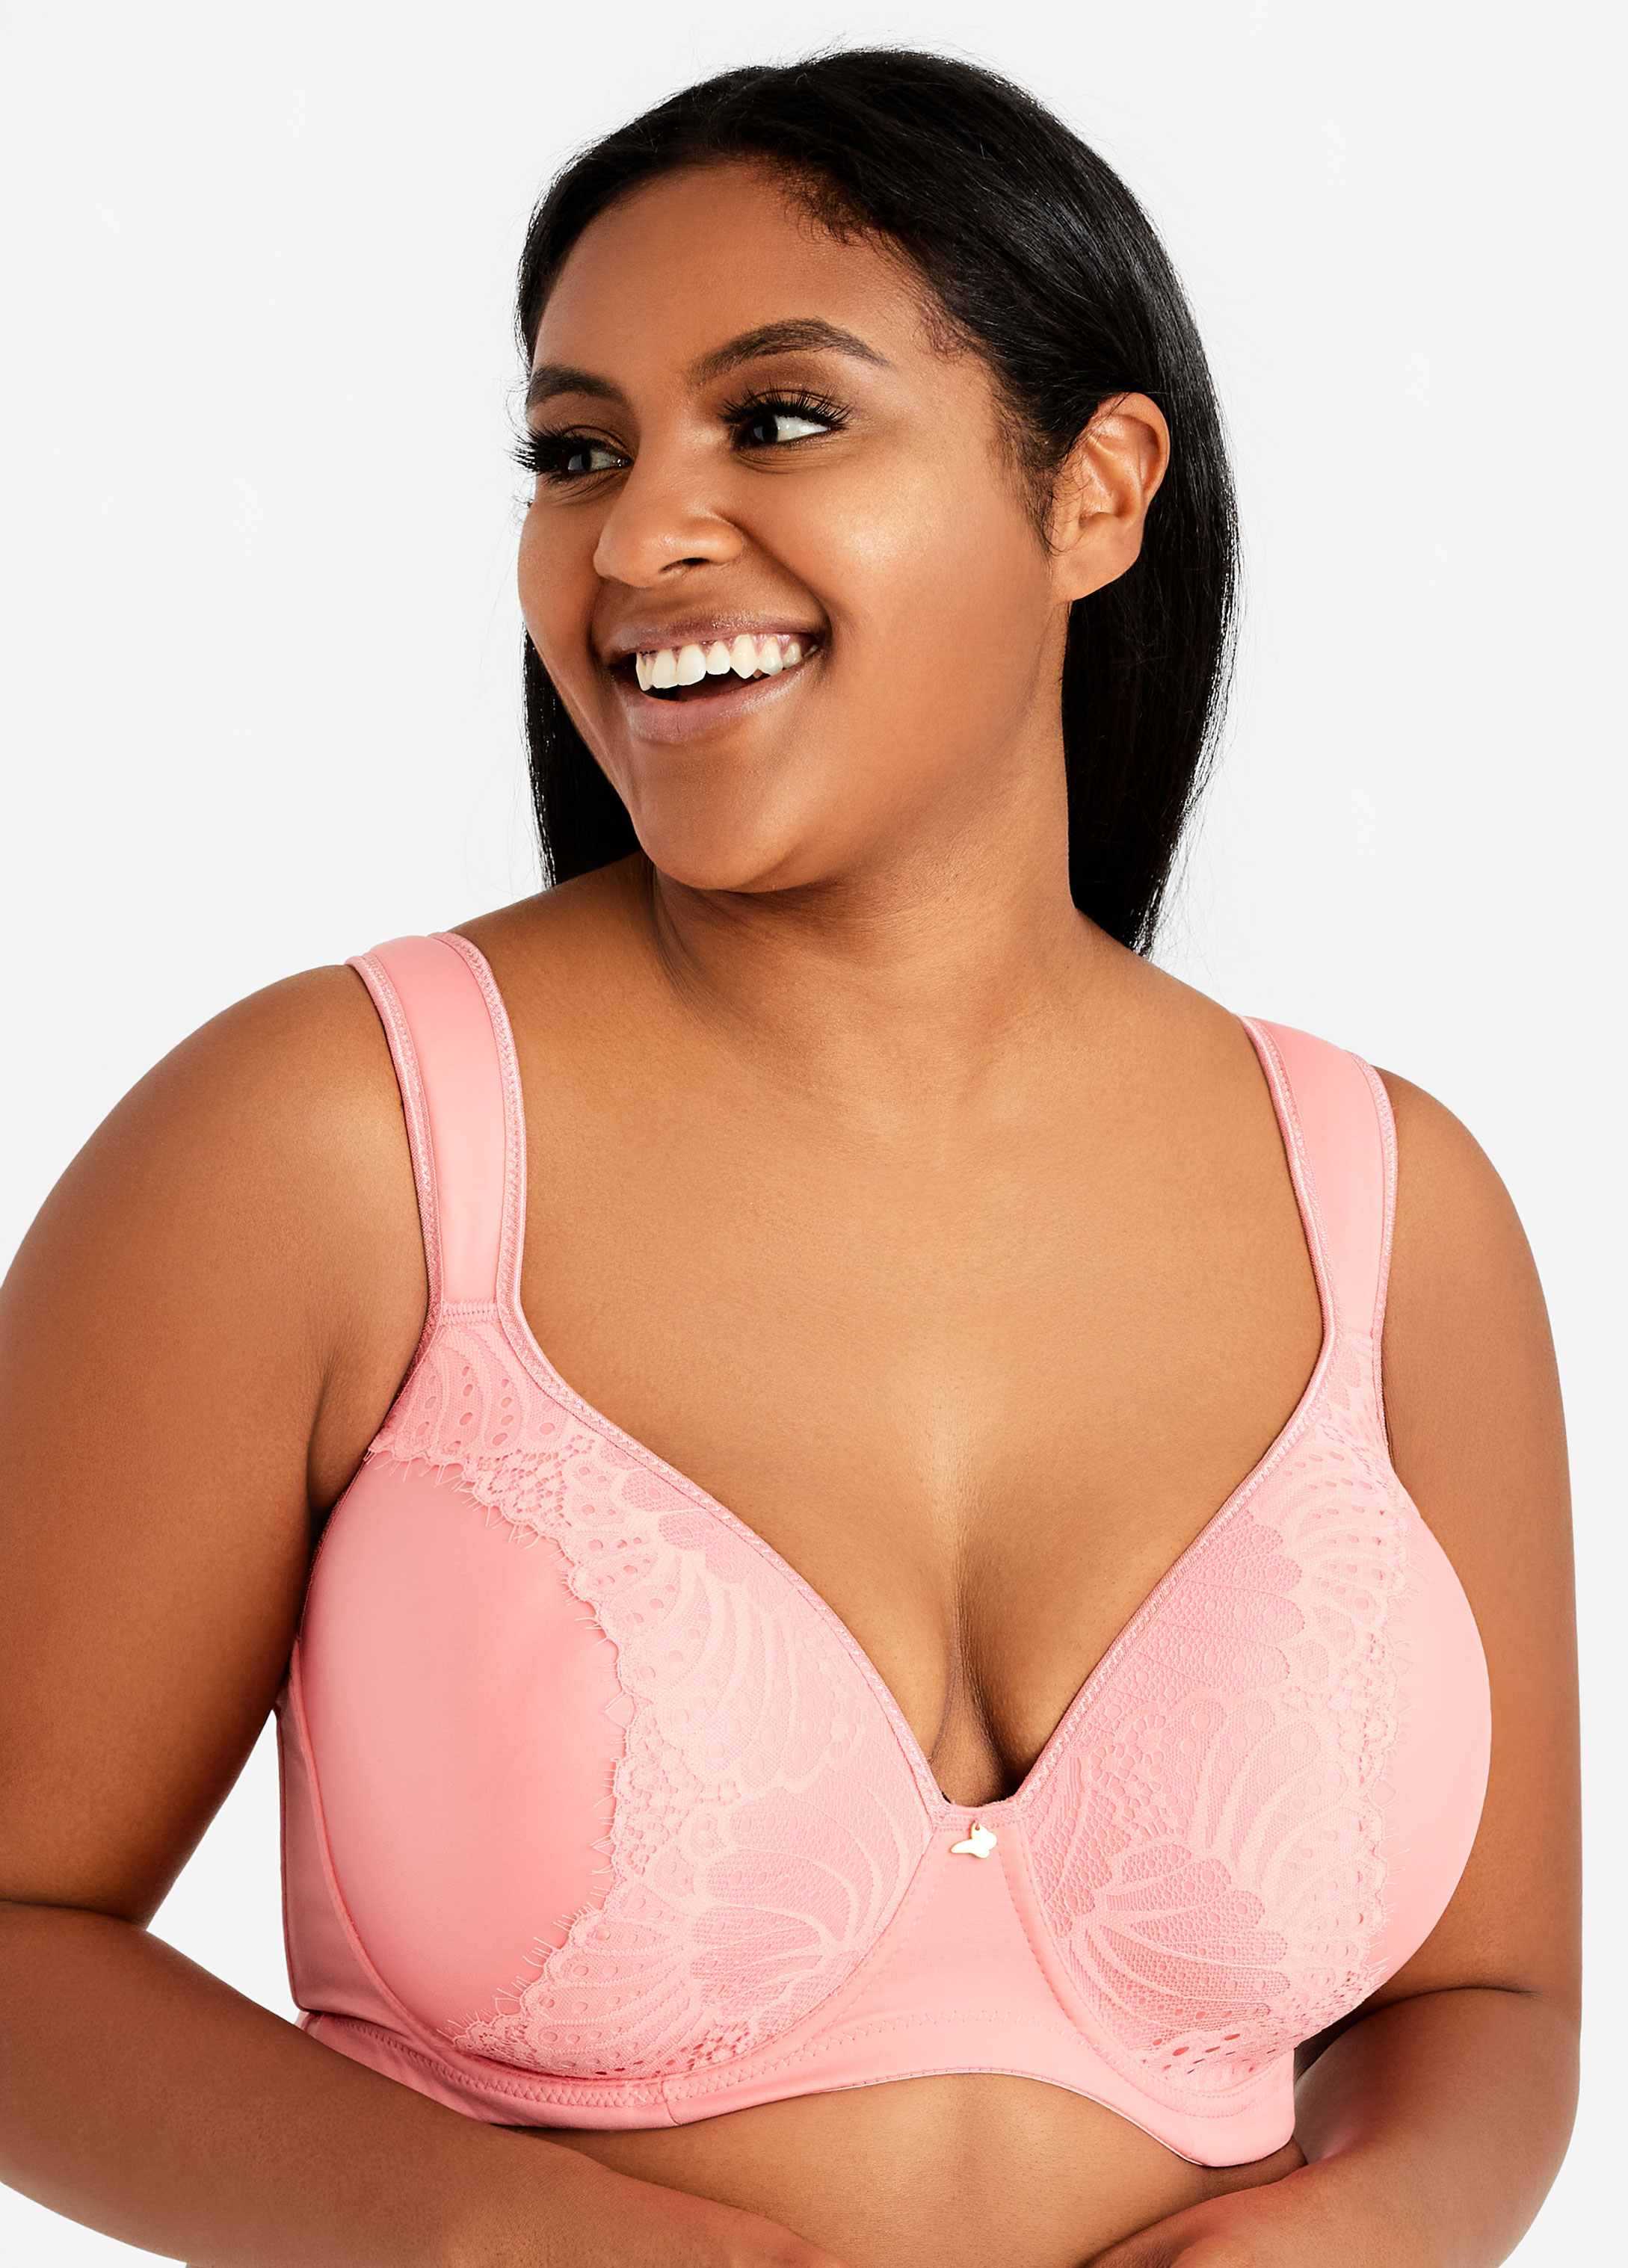 Ashley Stewart Butterfly Bra Is Back With Extended Sizes Up To 46G